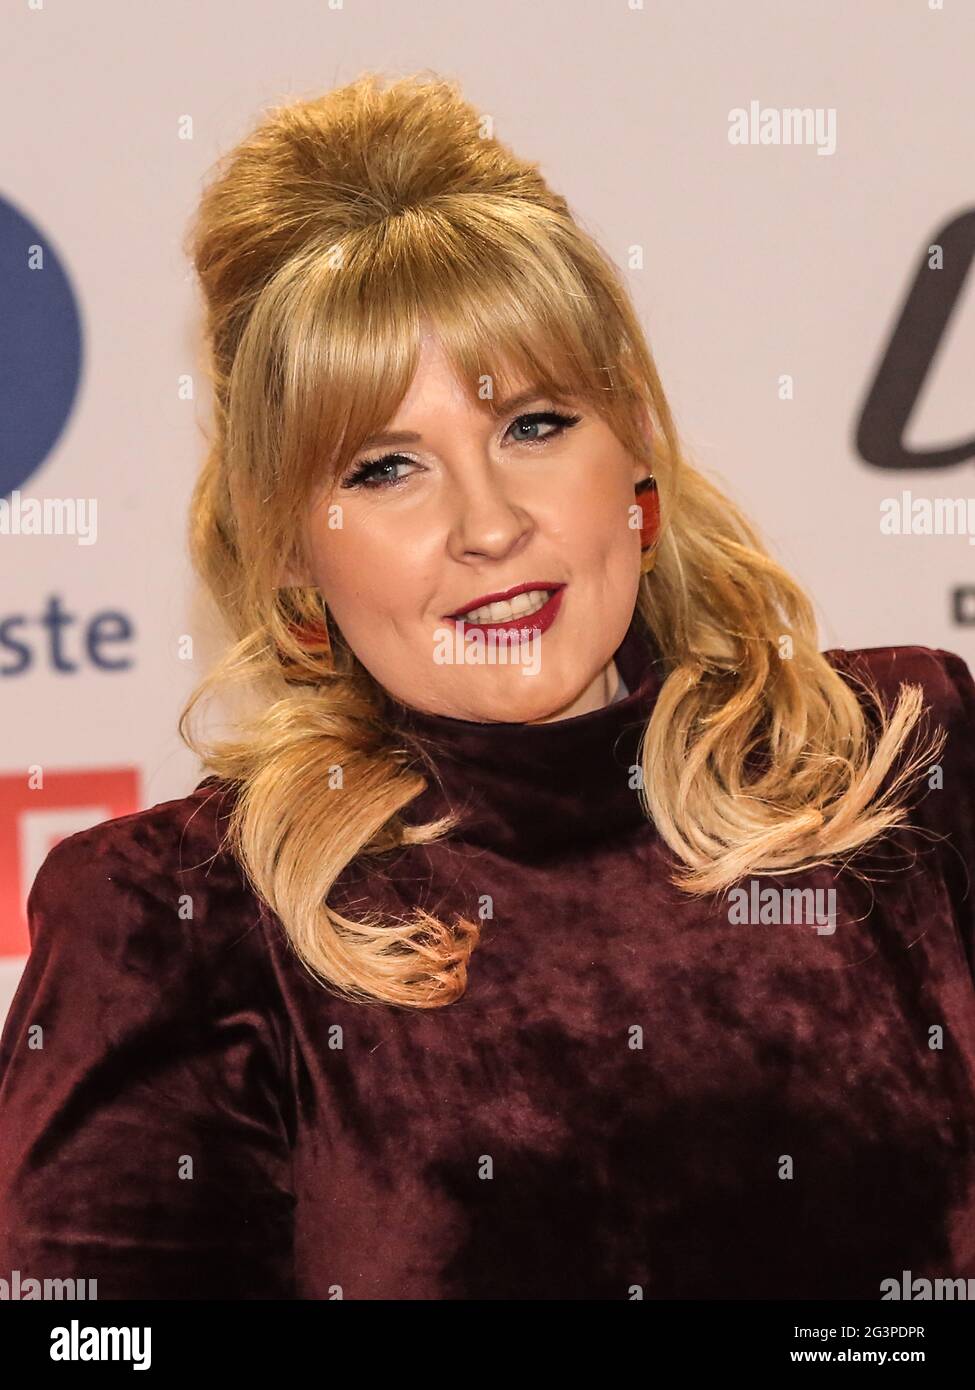 Irish singer Maite Kelly before the ARD TV show Schlagerchampions 2020 on January 11, 2020 in Berlin Stock Photo